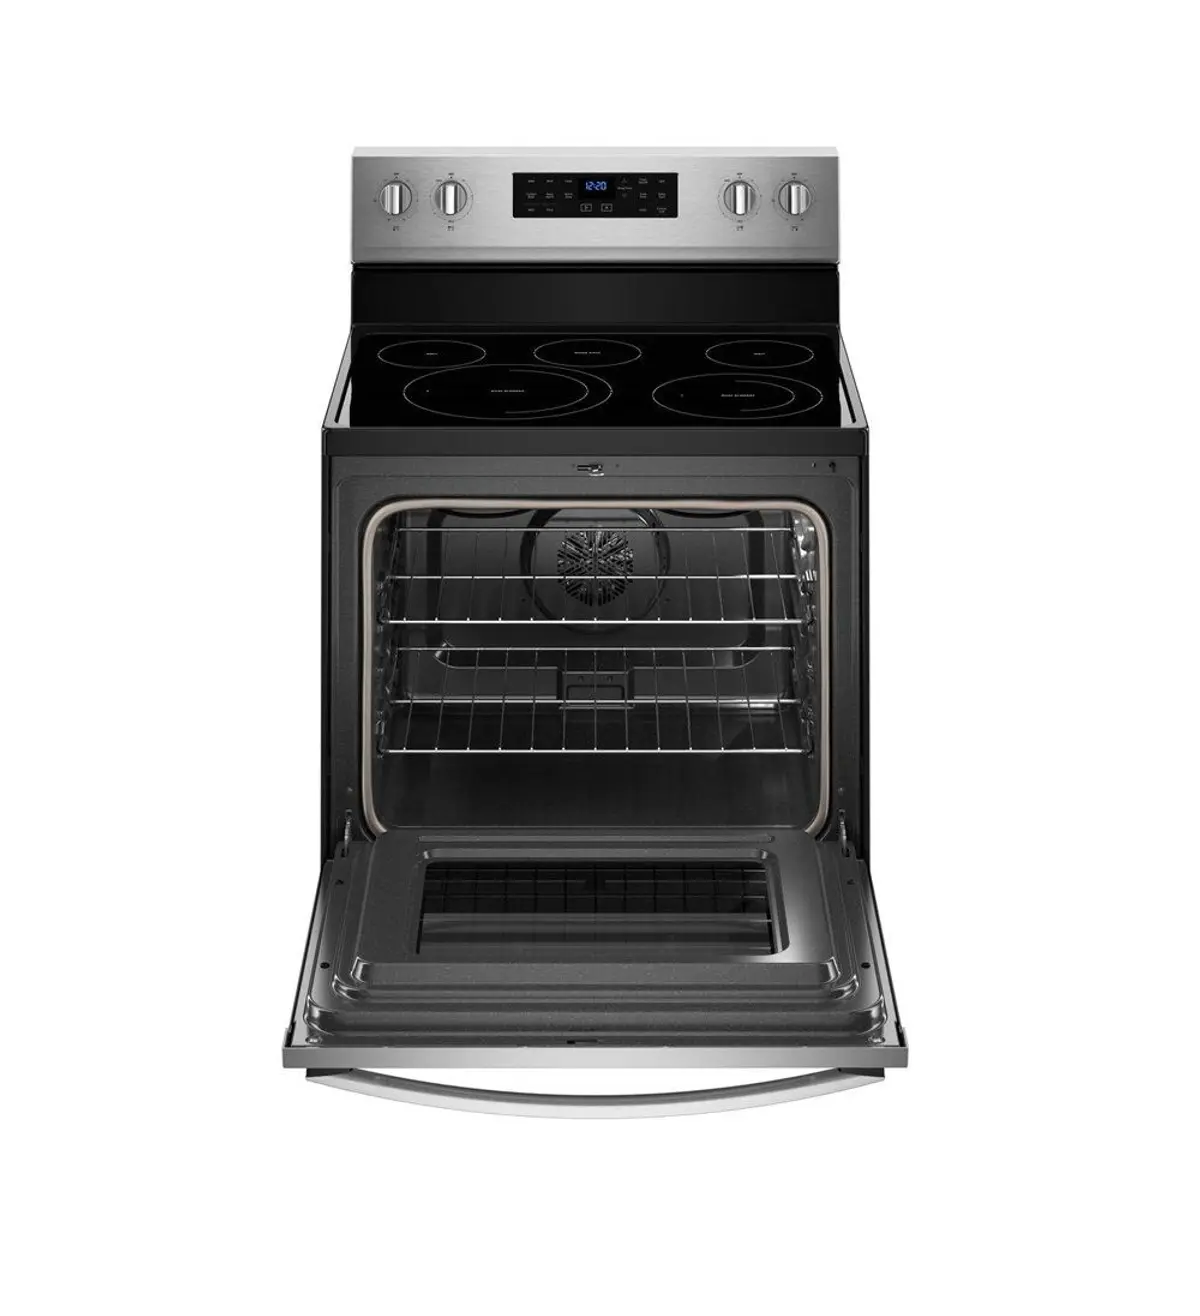 Whirlpool Convection best Freestanding Range review